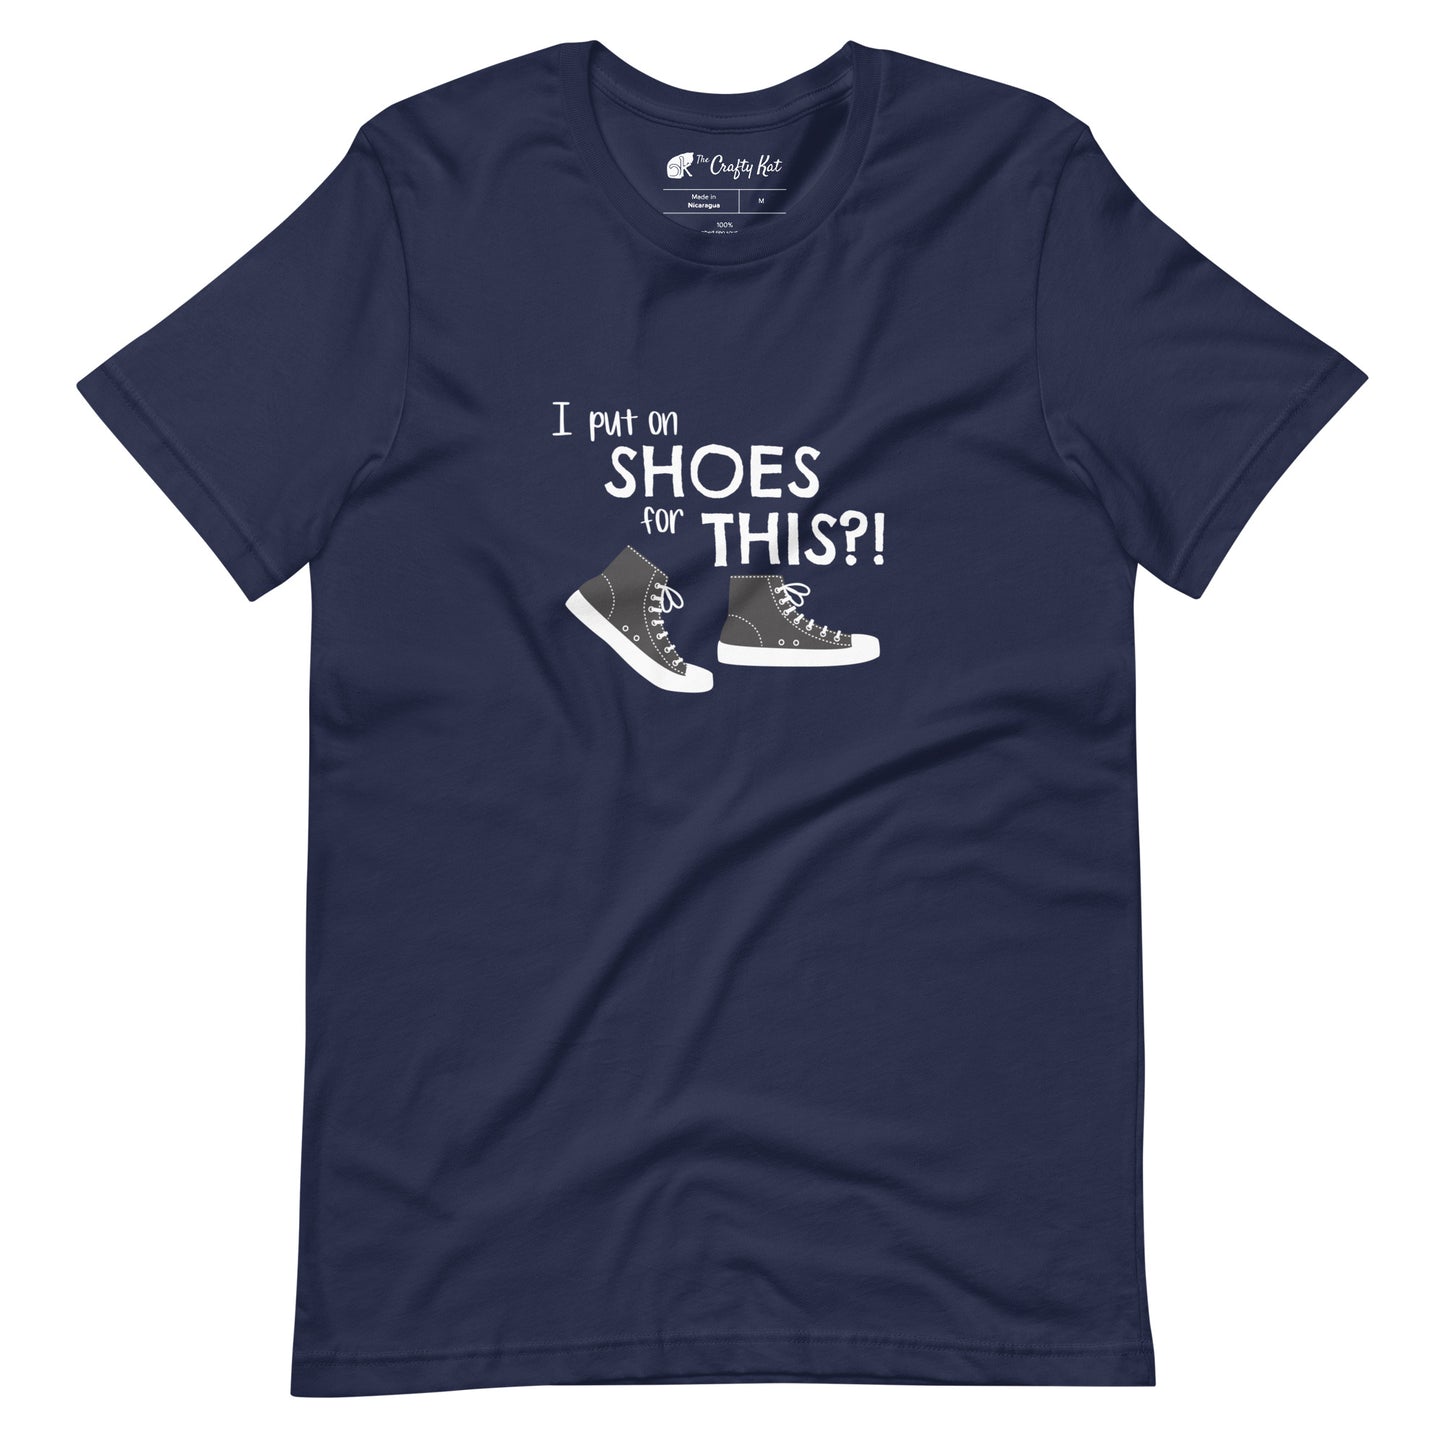 Navy t-shirt with graphic of black and white canvas "chuck" sneakers and text: "I put on SHOES for THIS?!"